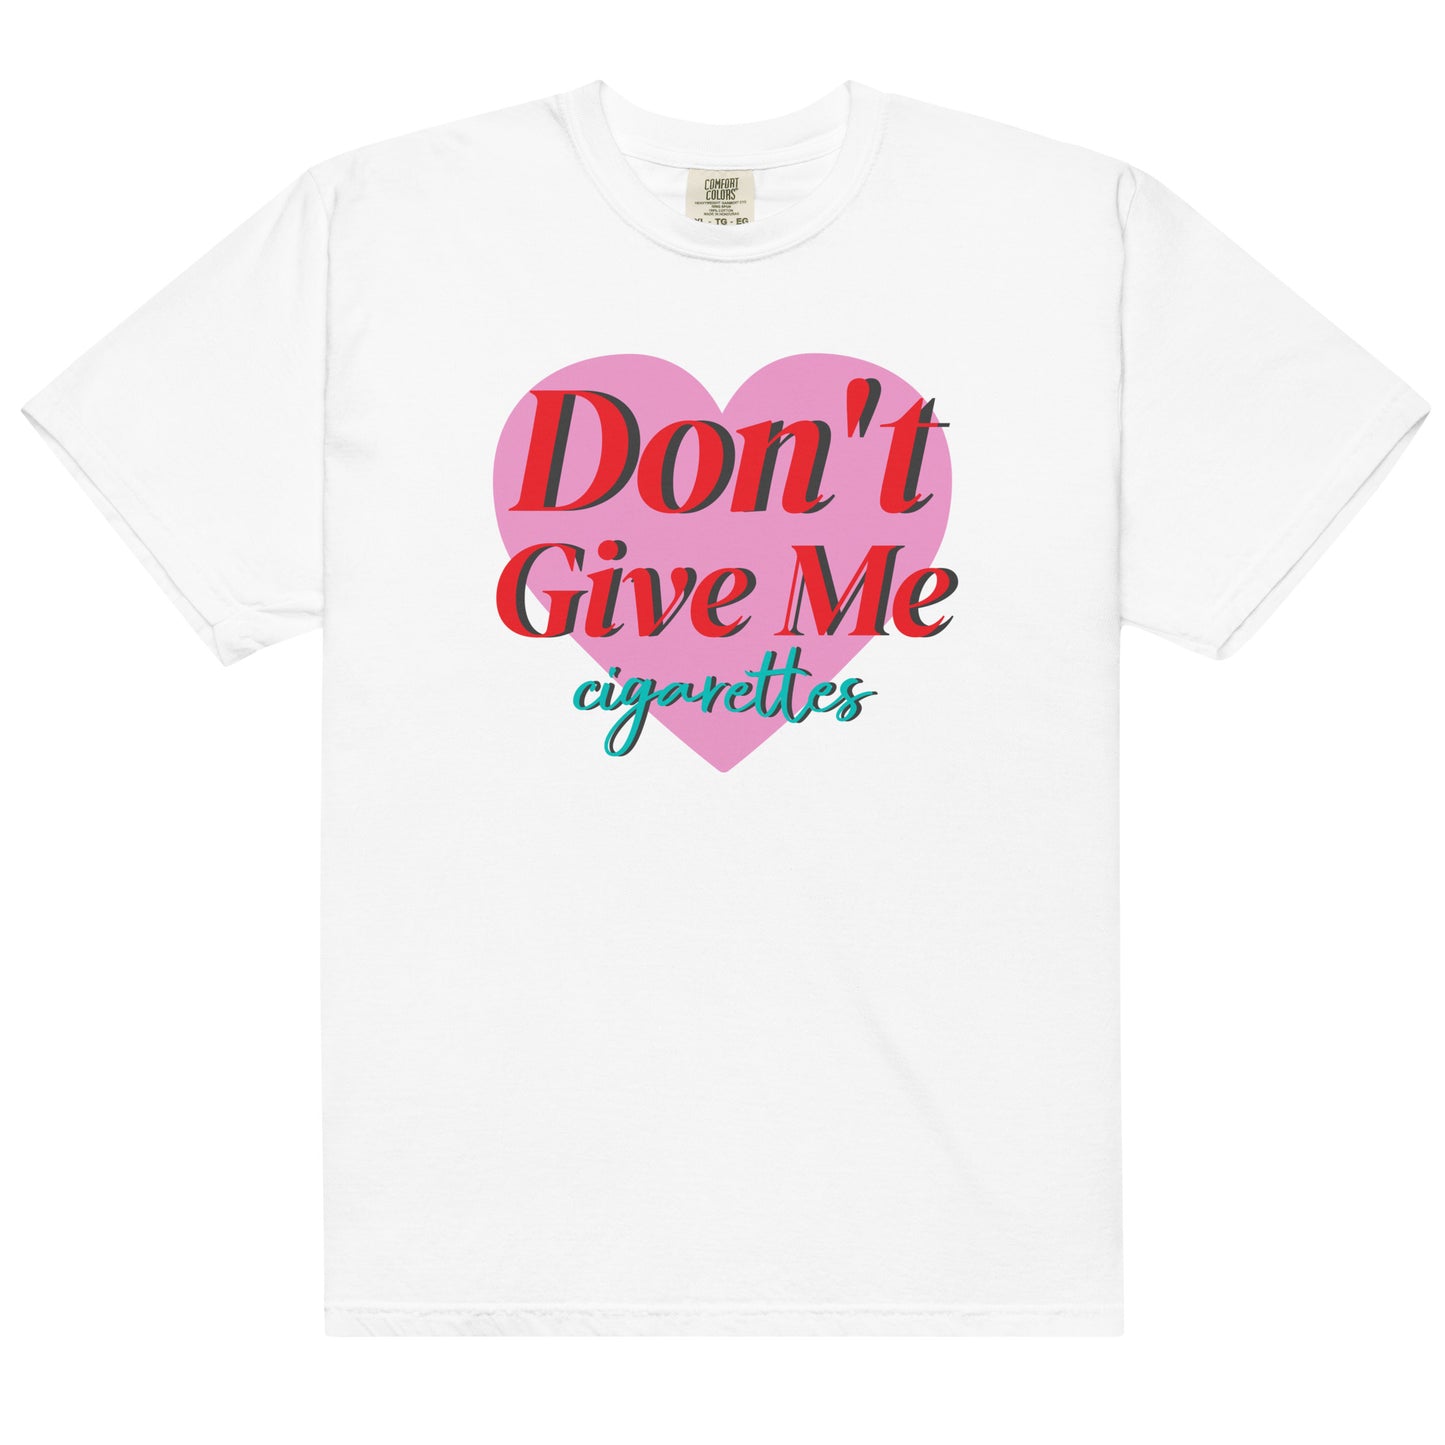 Don't Give Me Cigarettes Tee